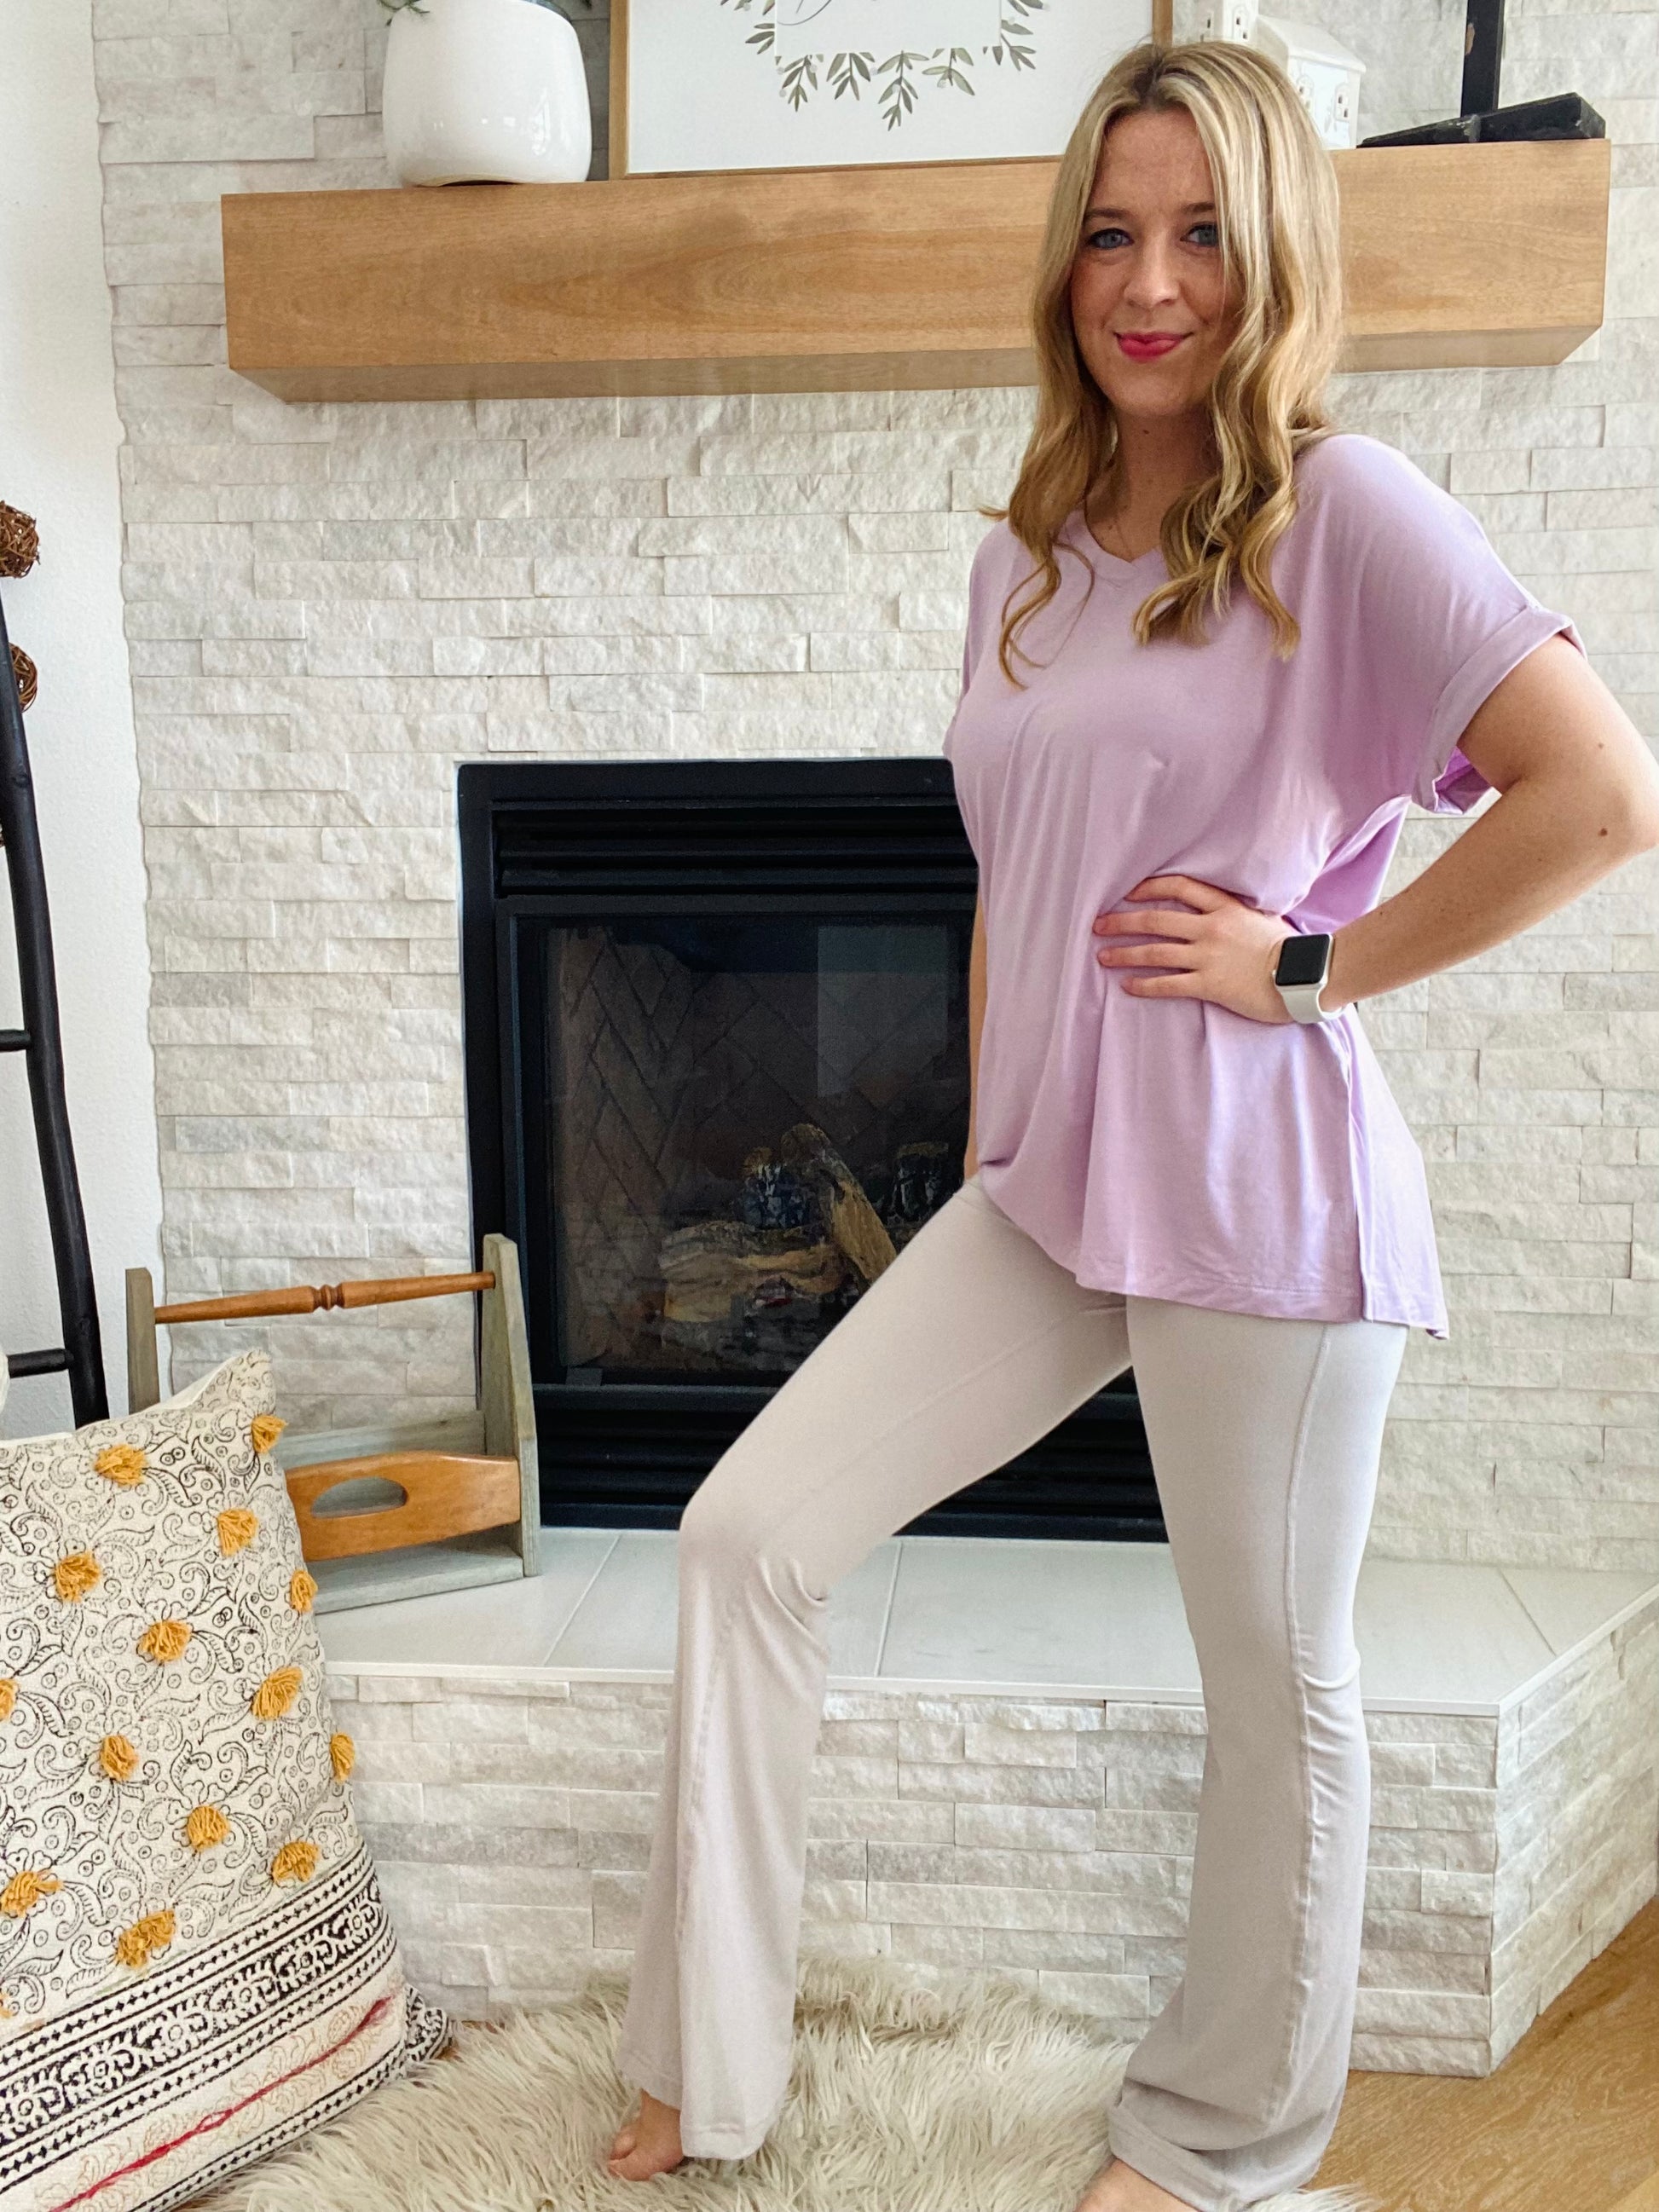 Our Chrome Buttery Soft yoga Pants blend fashion and function! These ultra-stretchy flare pants are so soft you'll feel like you're floating on a cloud. Look cute when you hit the gym, run errands and run the world! Work hard, stay comfortable and never sacrifice style. #winning!